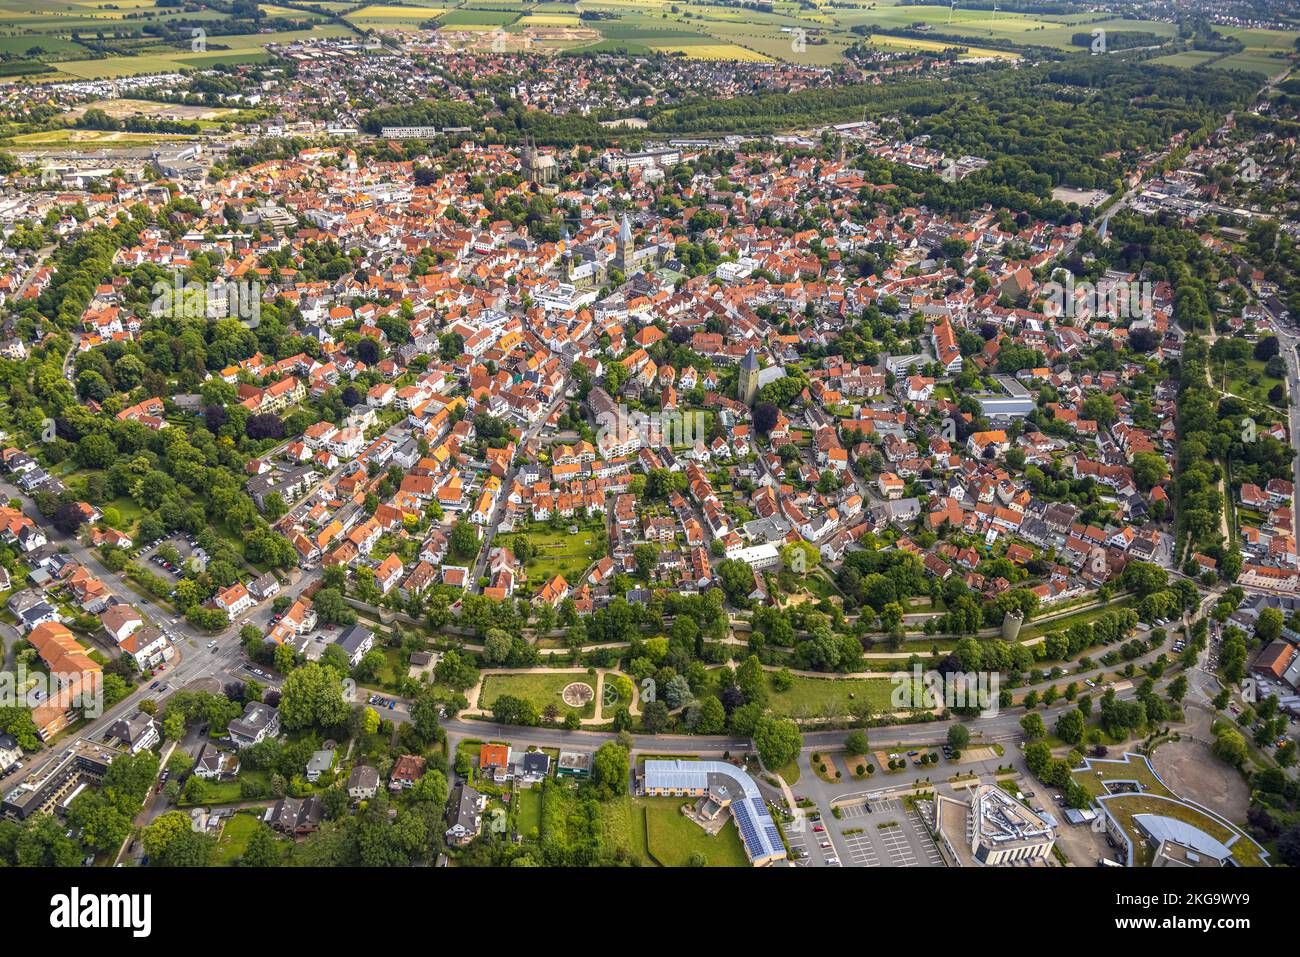 Aerial view, city view and old town with (from left) Sankt Pauli church, St. Patrokli cathedral, St. Petri Alde Kerke and evang. church Sankt Maria zu Stock Photo